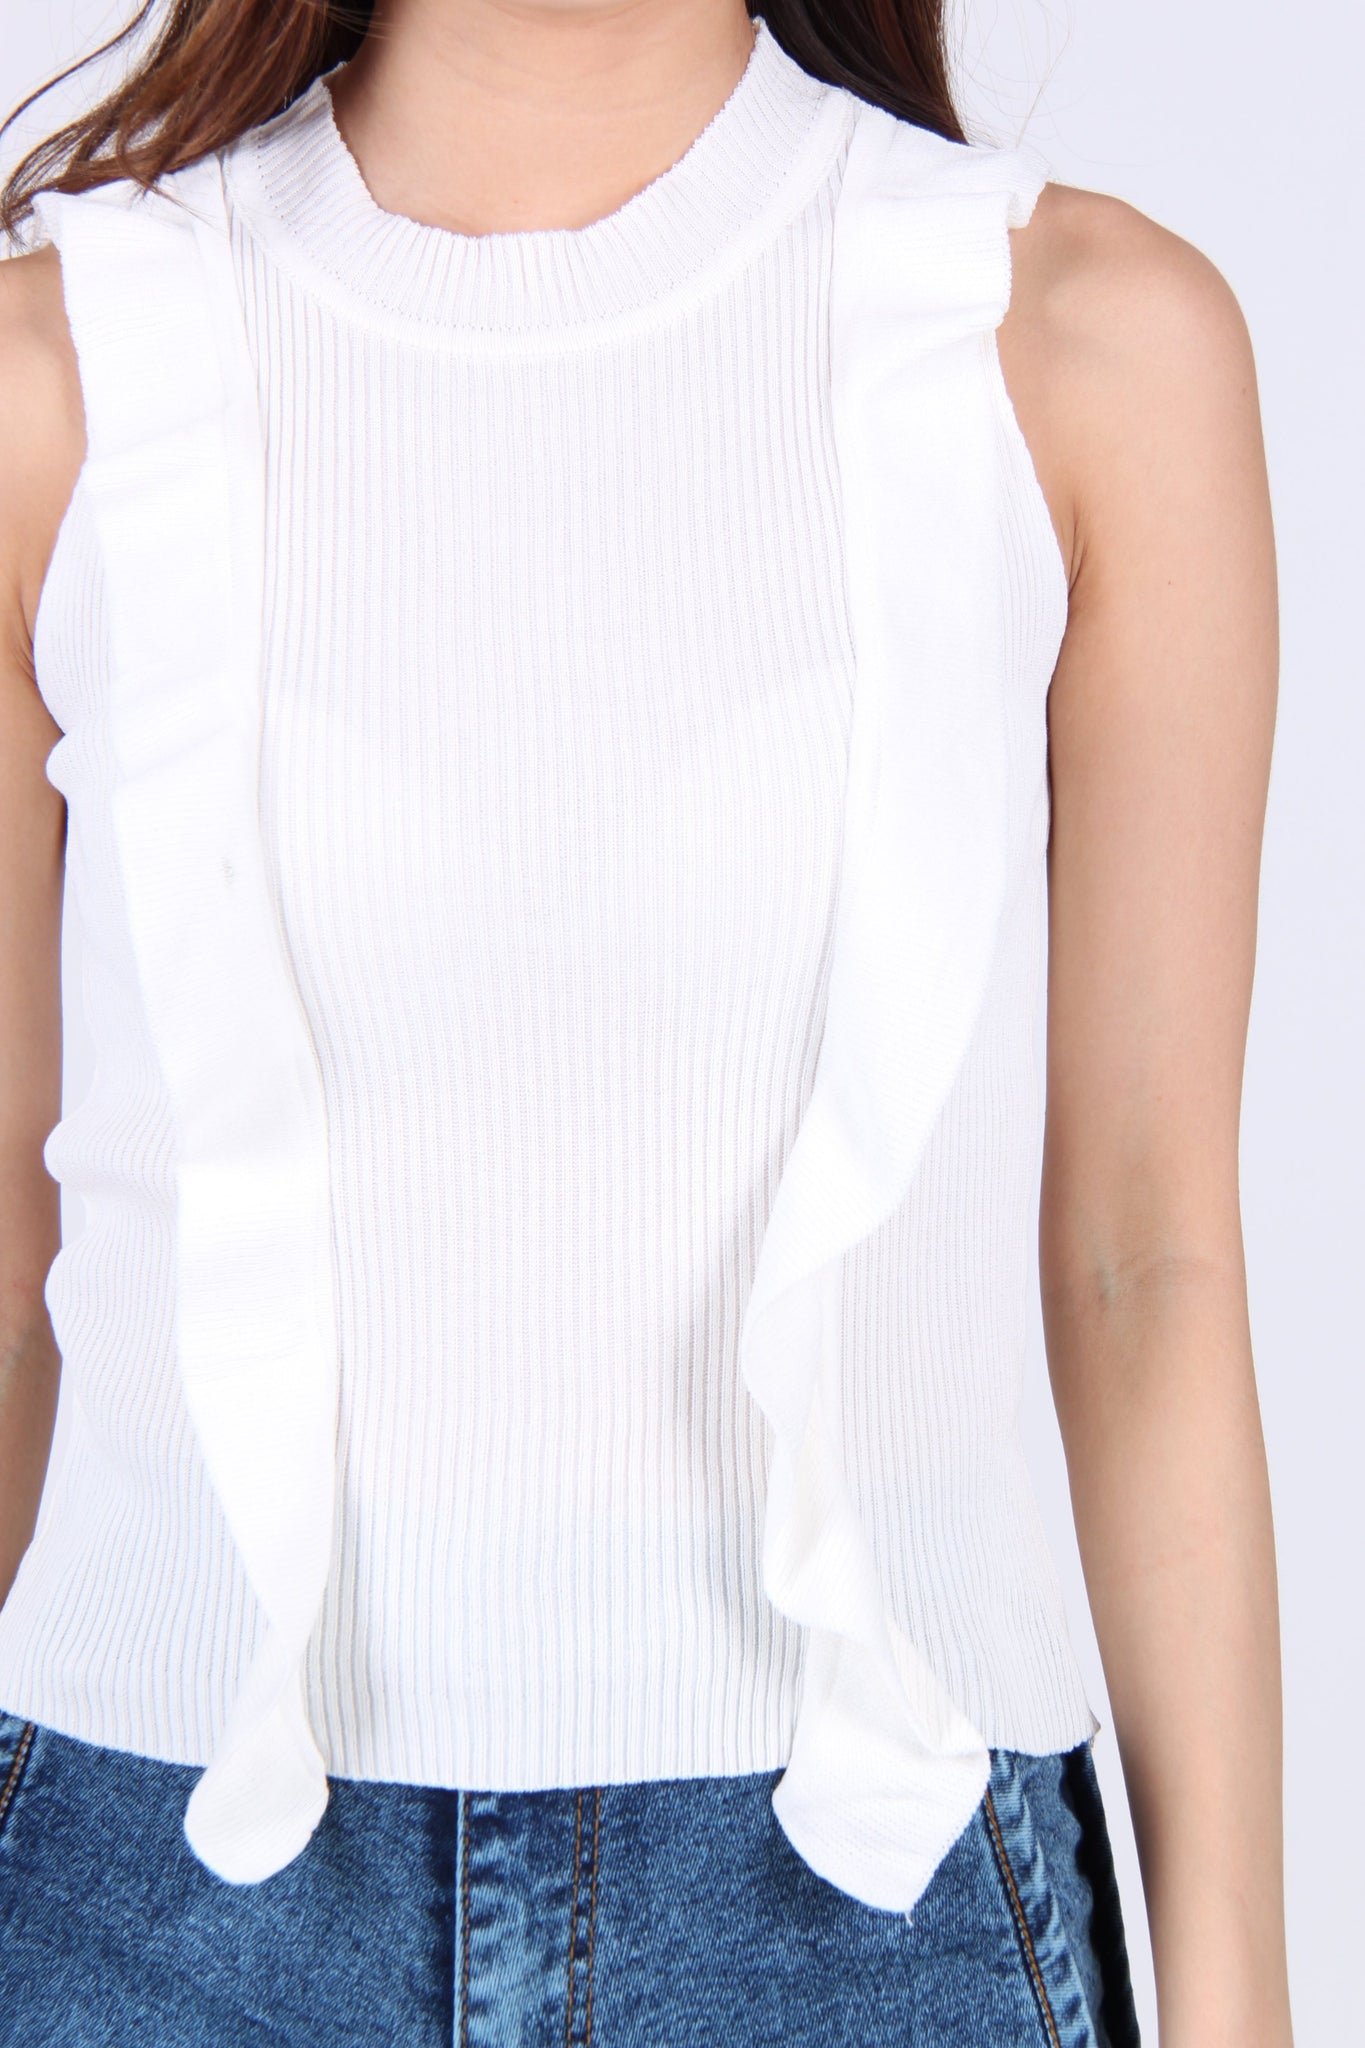 Front Ruffles Down Sleeveless Knit Top in White